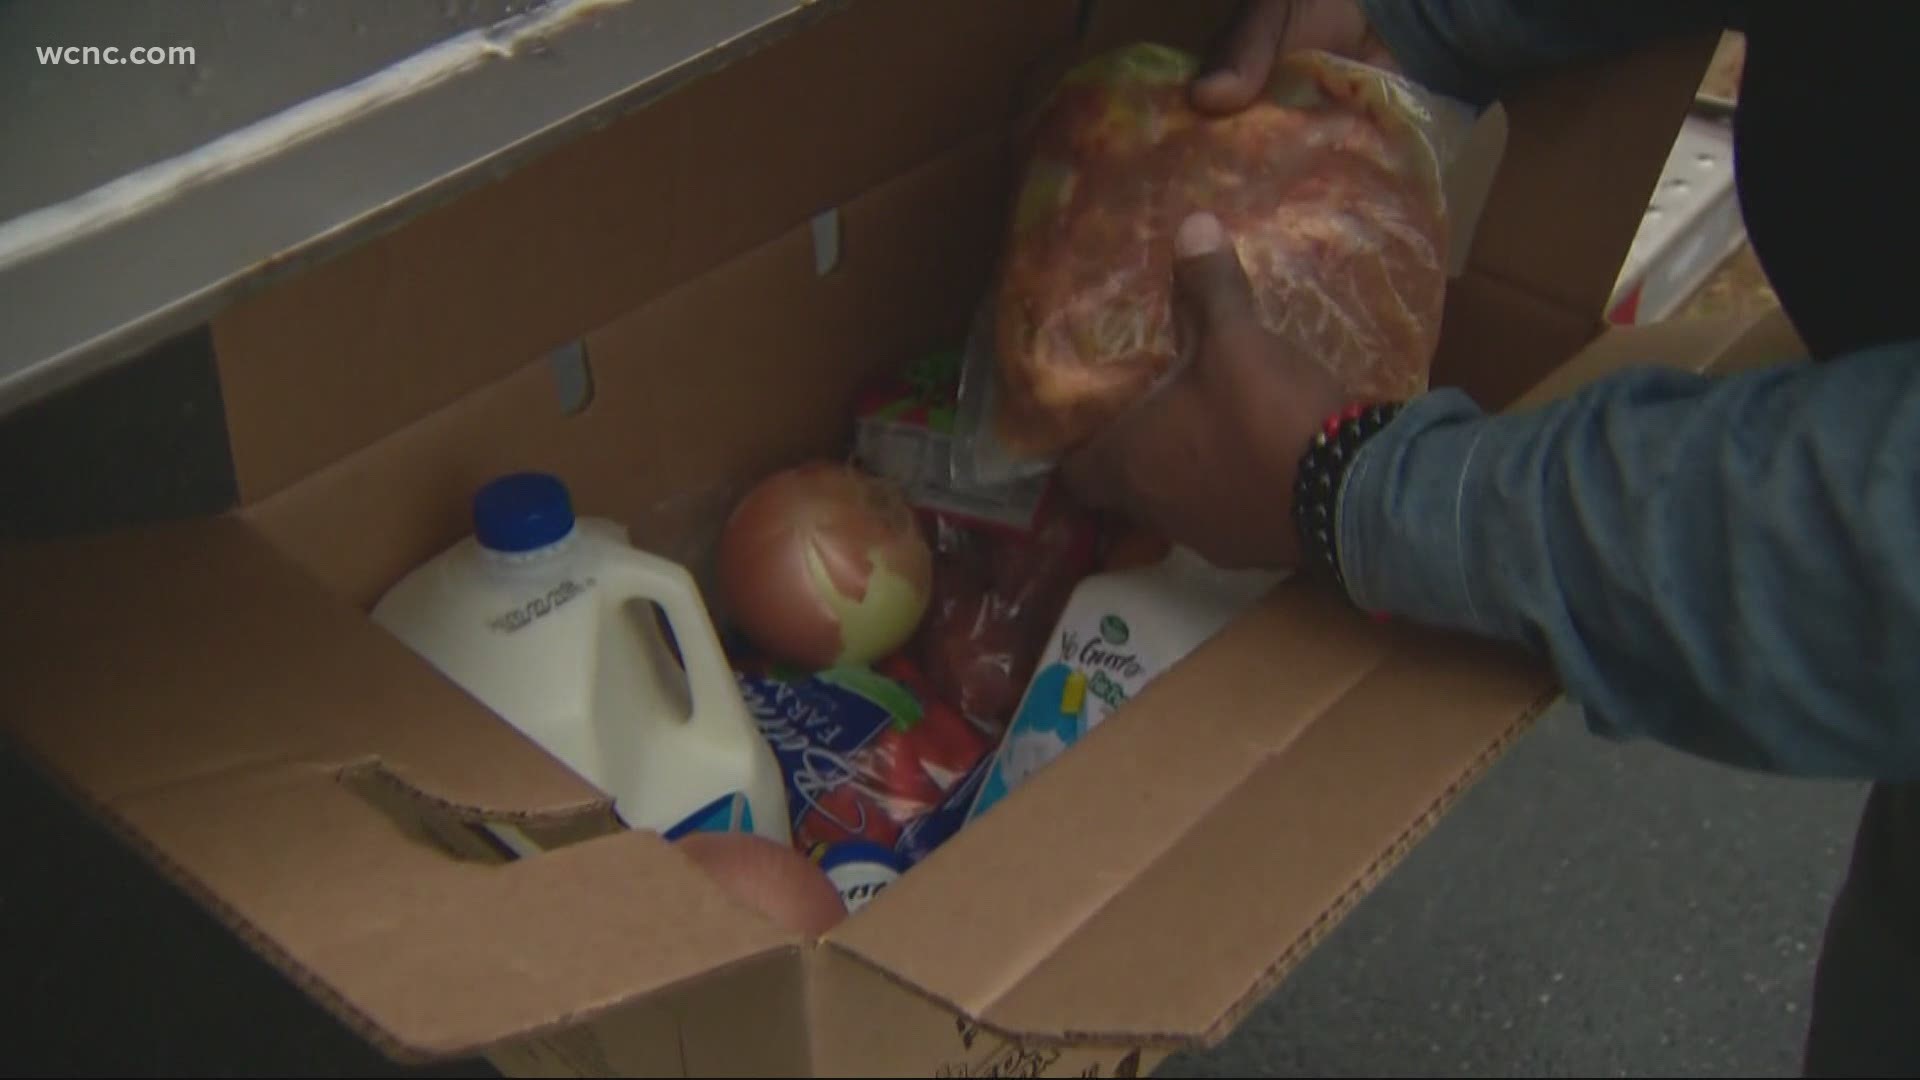 The end of South Carolina's state of emergency means the end of added benefits, including food assistance.